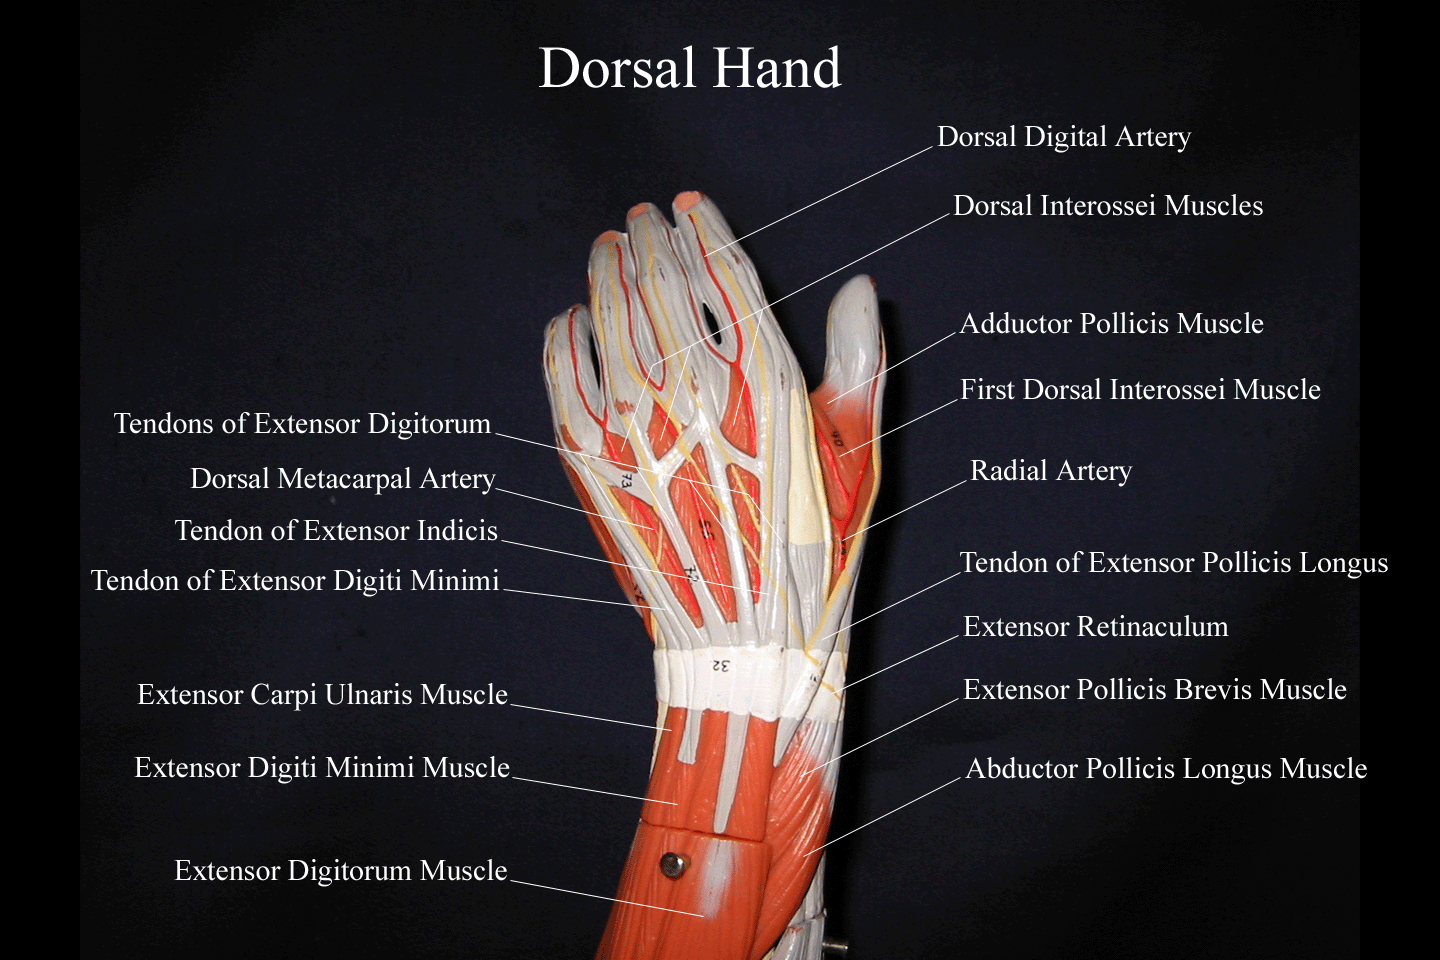 a labeled picture of the hand model from a dorsal view